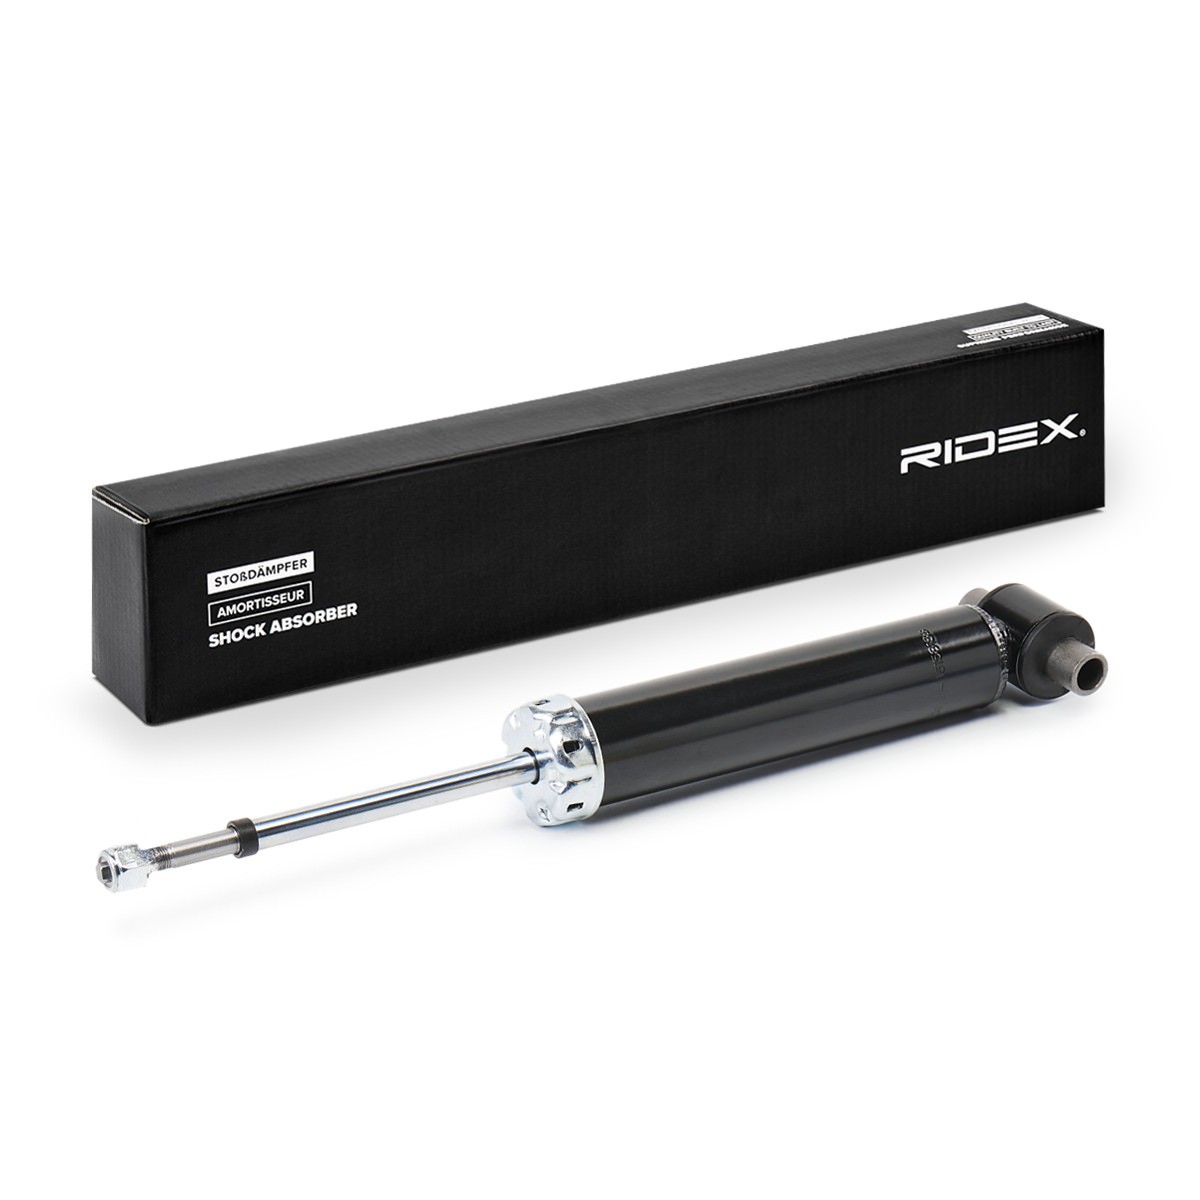 Great value for money - RIDEX Shock absorber 854S17955